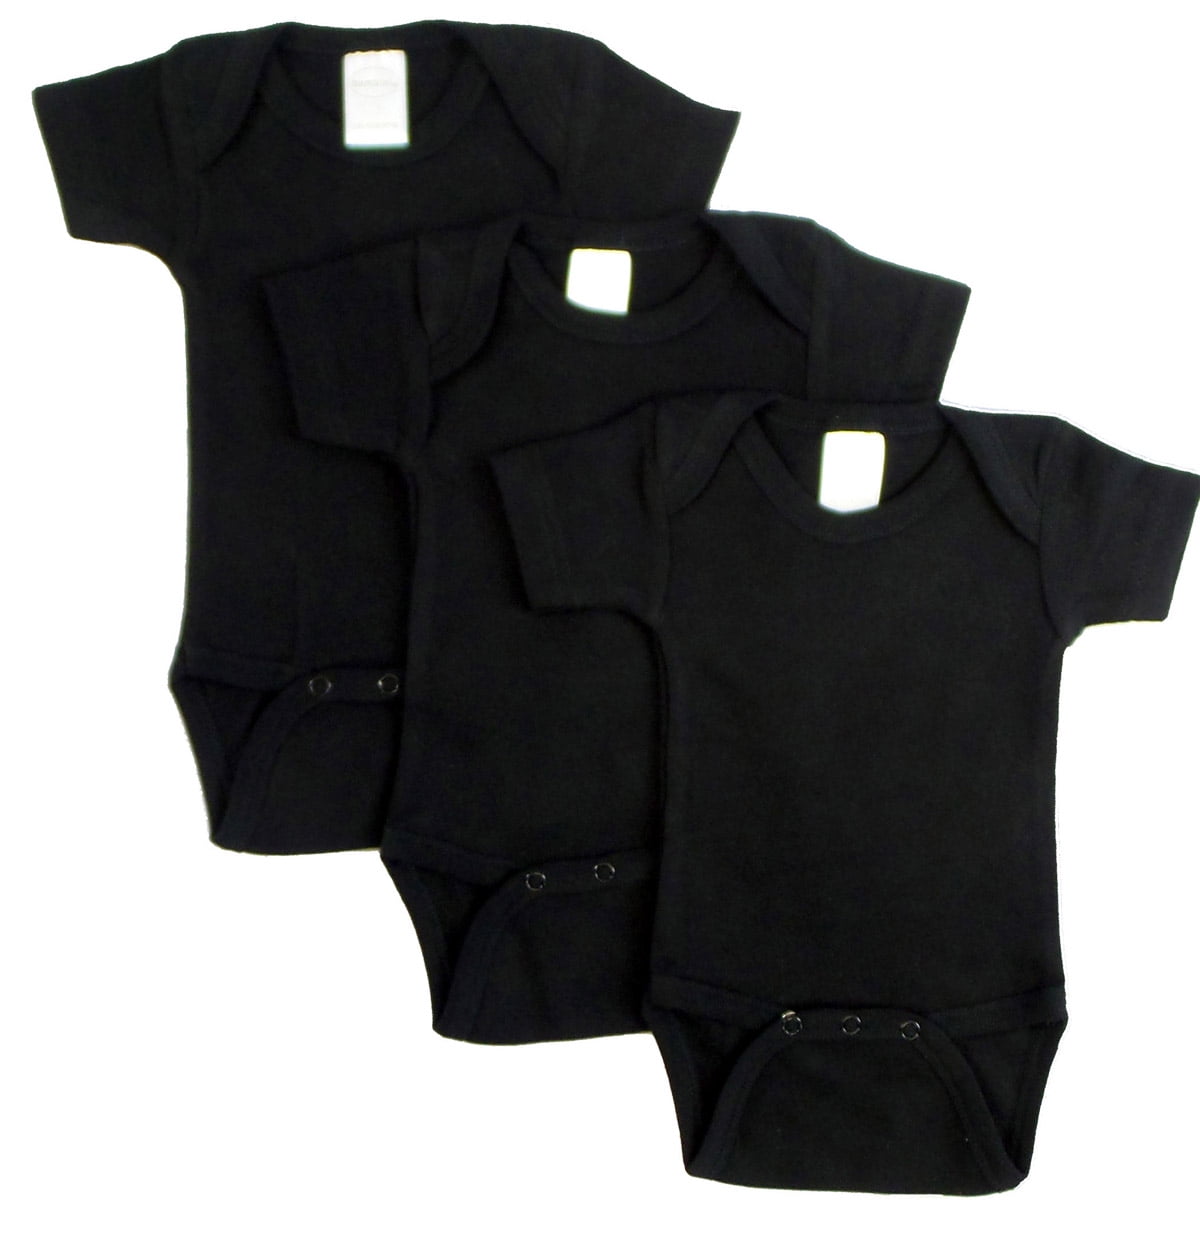 Short Sleeve - Black, Small - Pack Of 3